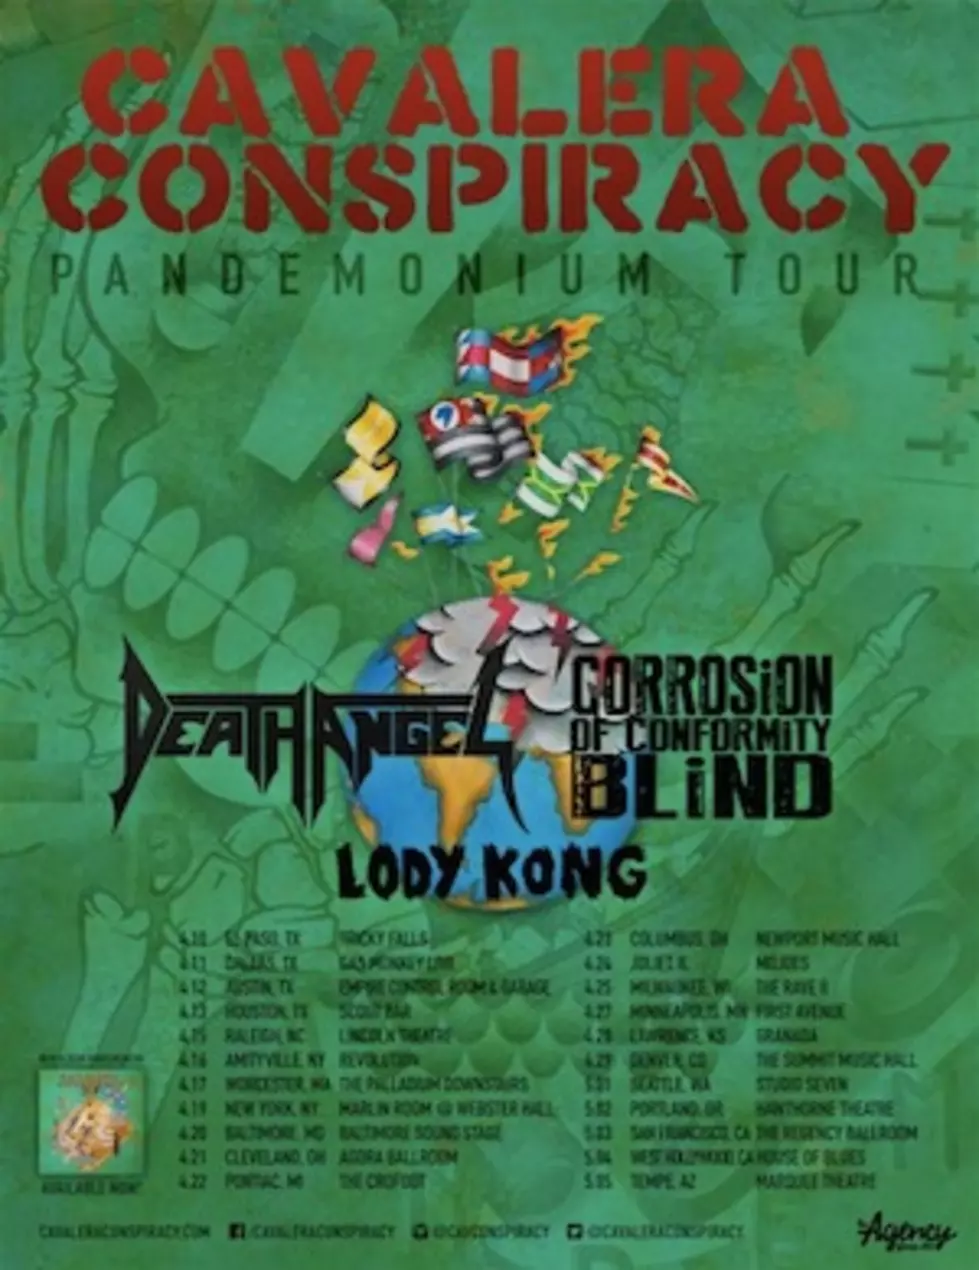 Cavalera Conspiracy to Embark on U.S. Tour With Death Angel